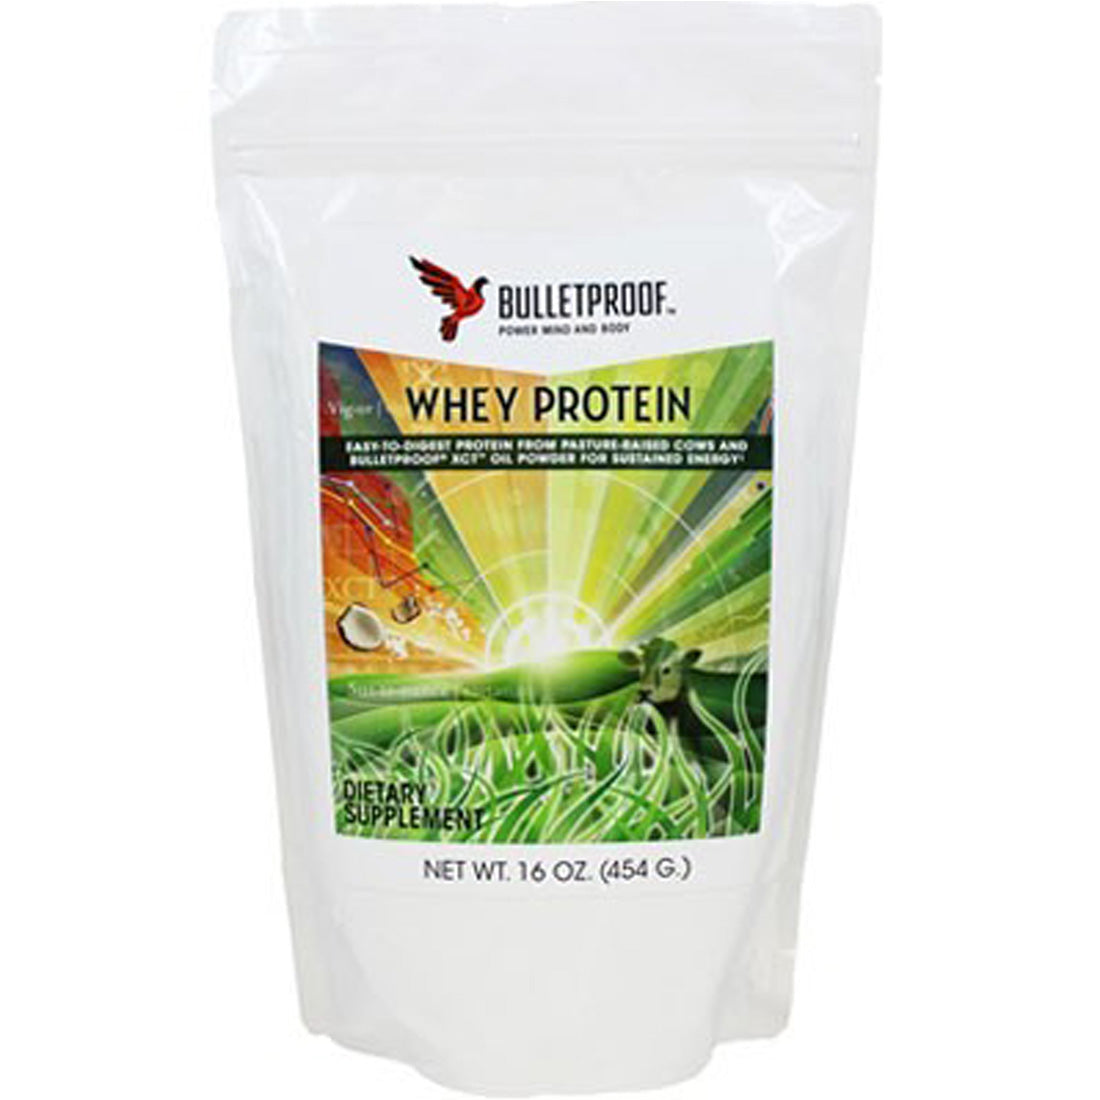 Bulletproof Upgraded Whey Protein, 454g